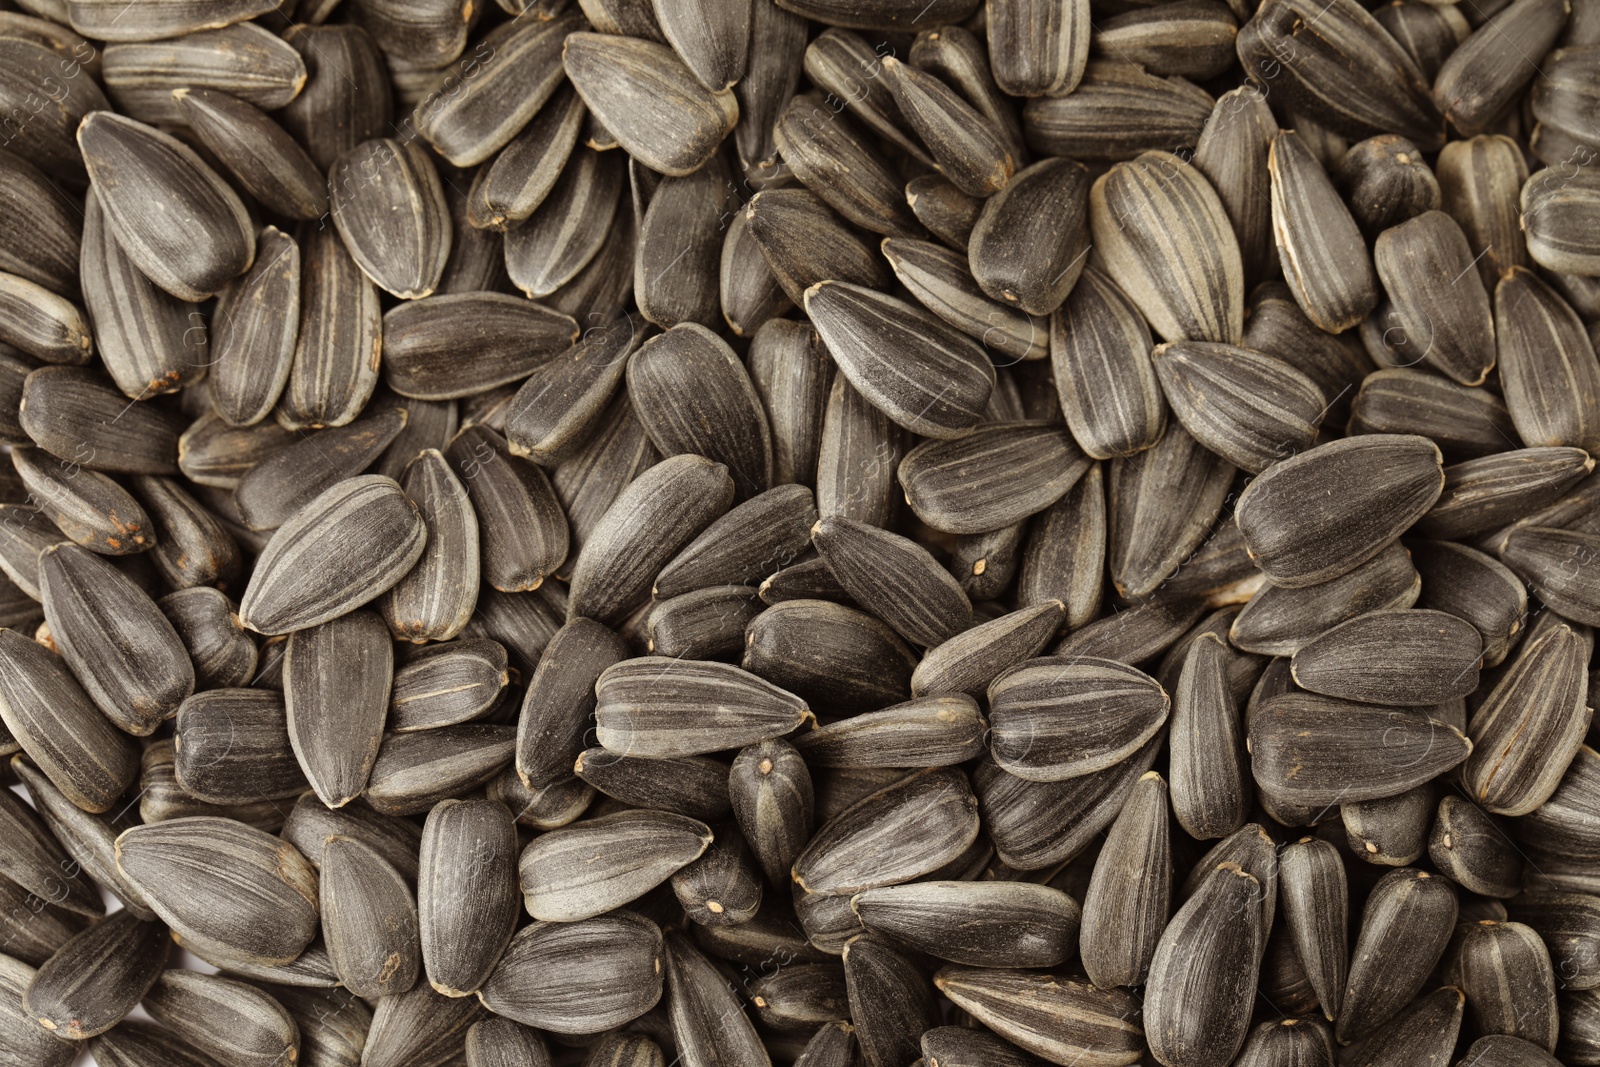 Photo of Raw sunflower seeds as background, top view